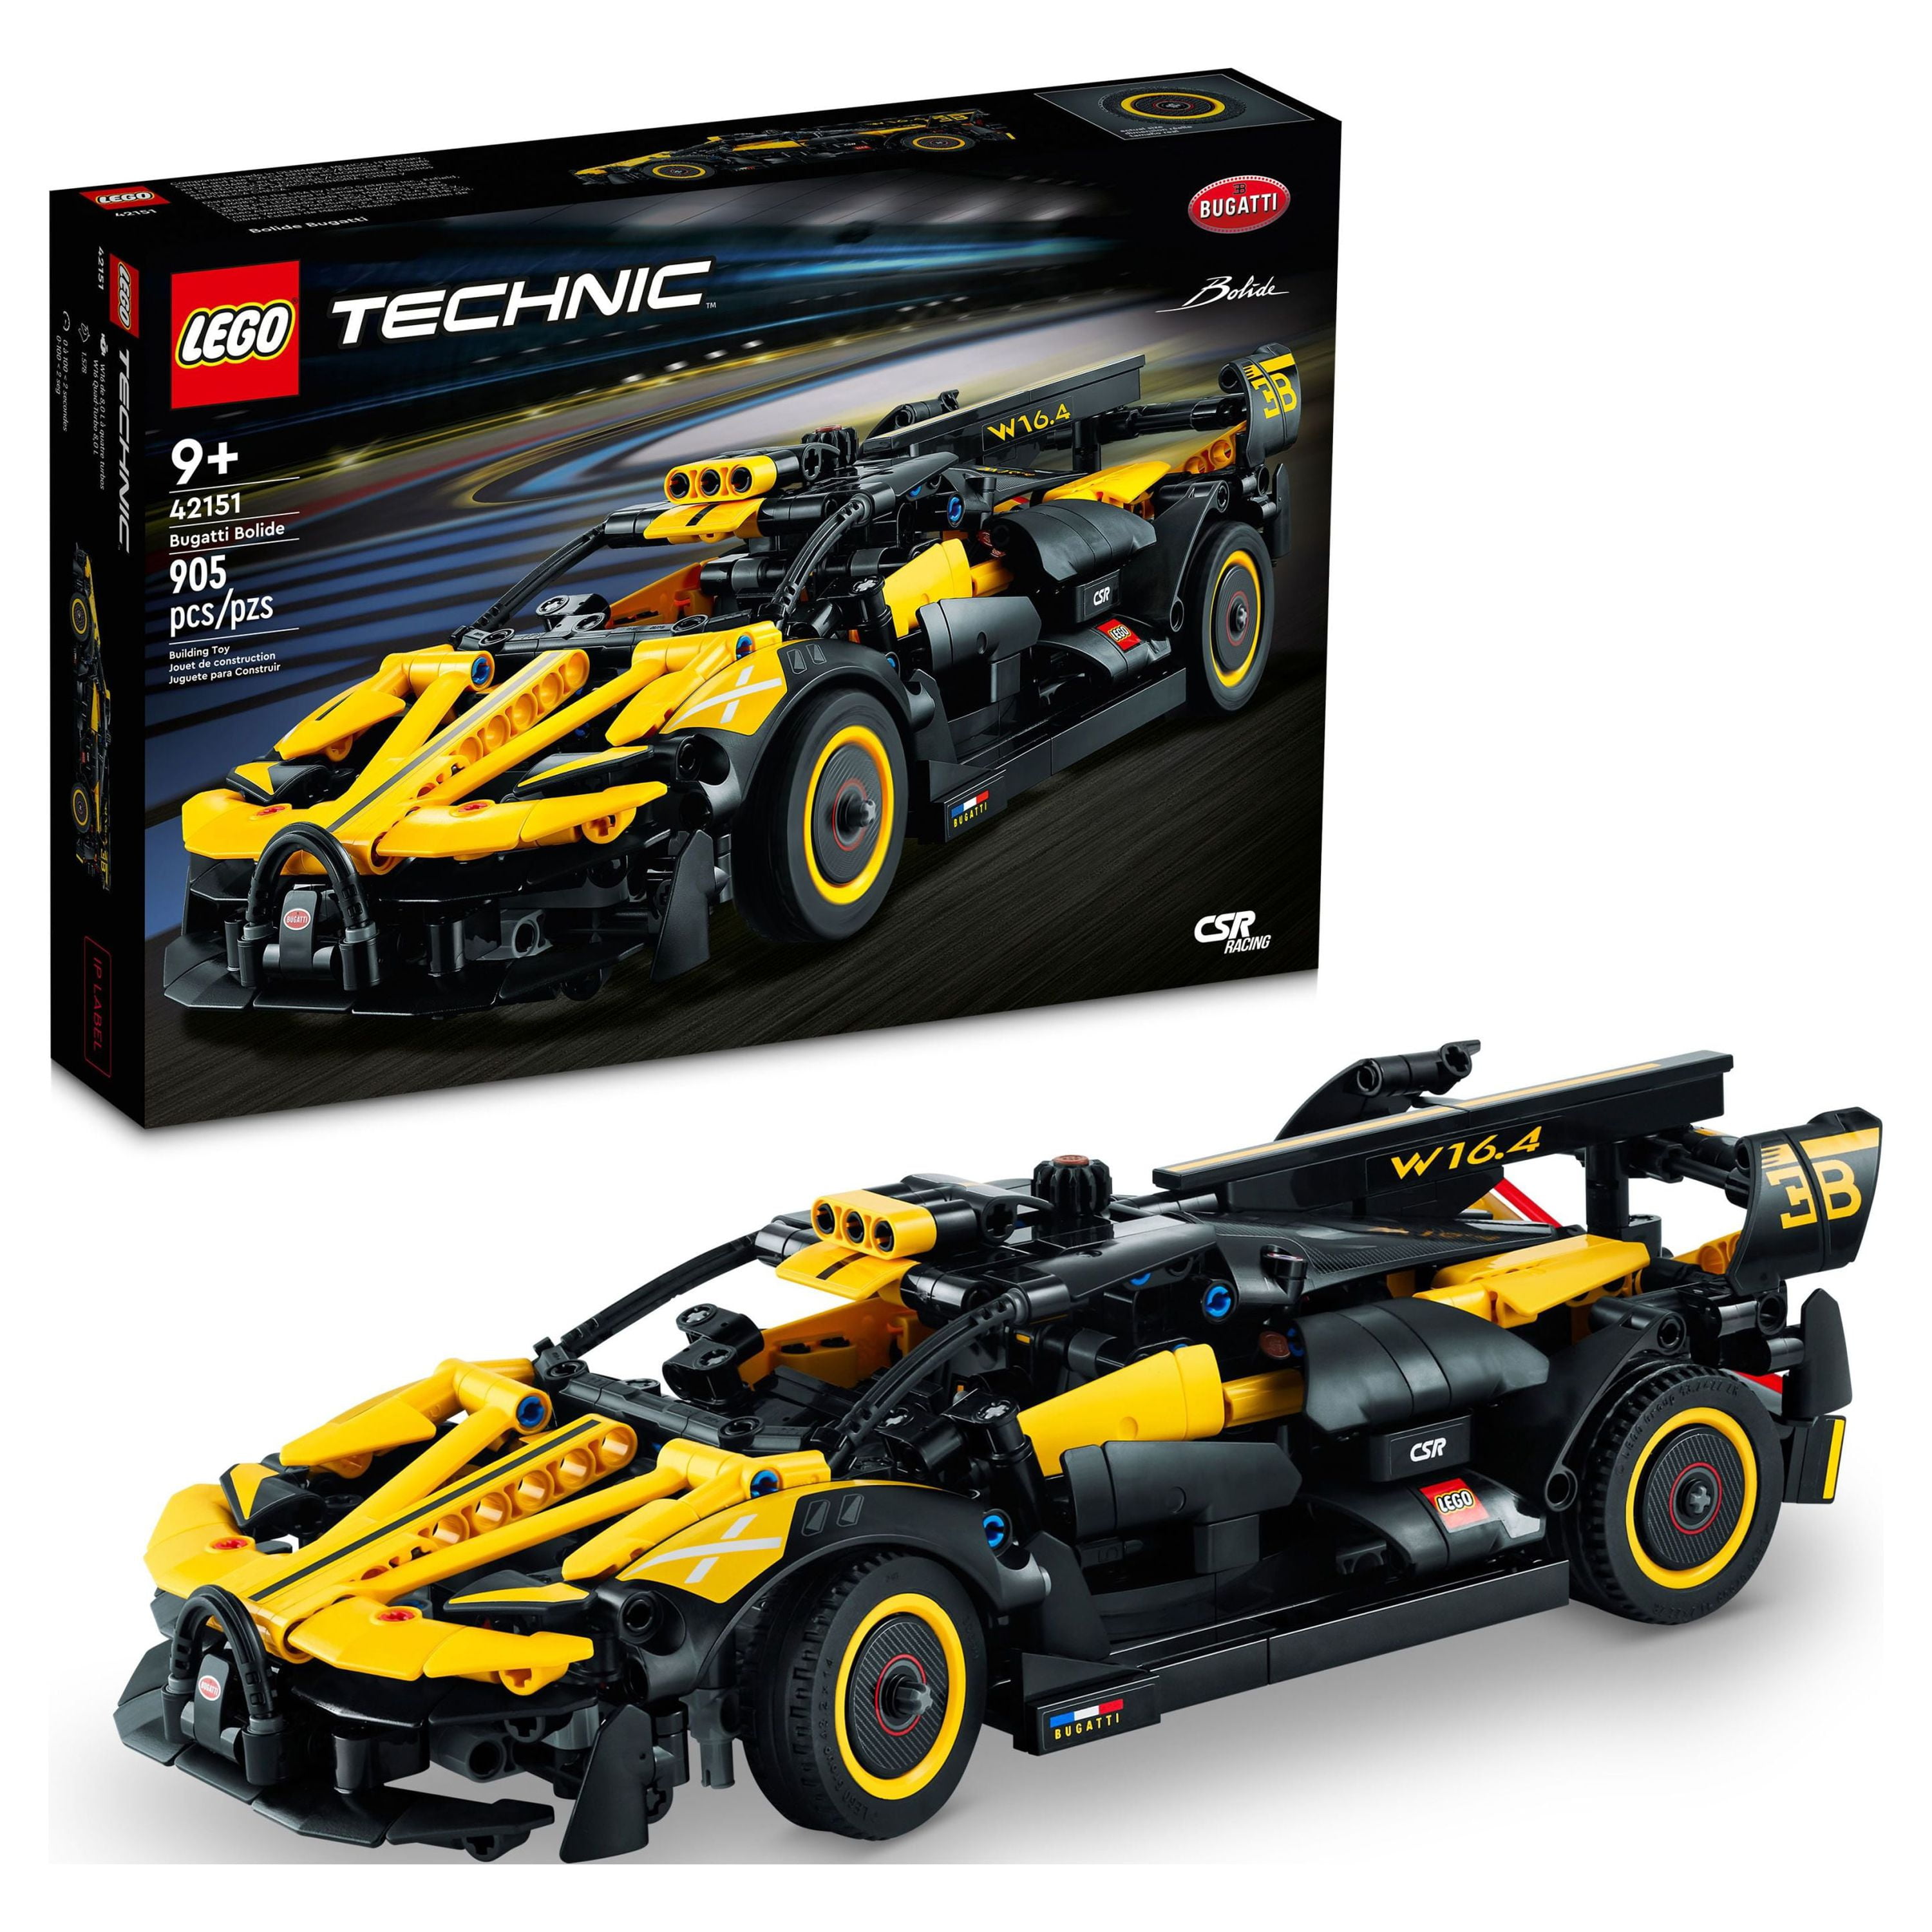 LEGO Technic Bugatti Bolide Racing Car Building Set 42151 - Model and Race  Engineering Toy, Collectible Sports Car Construction Kit for Boys, Girls